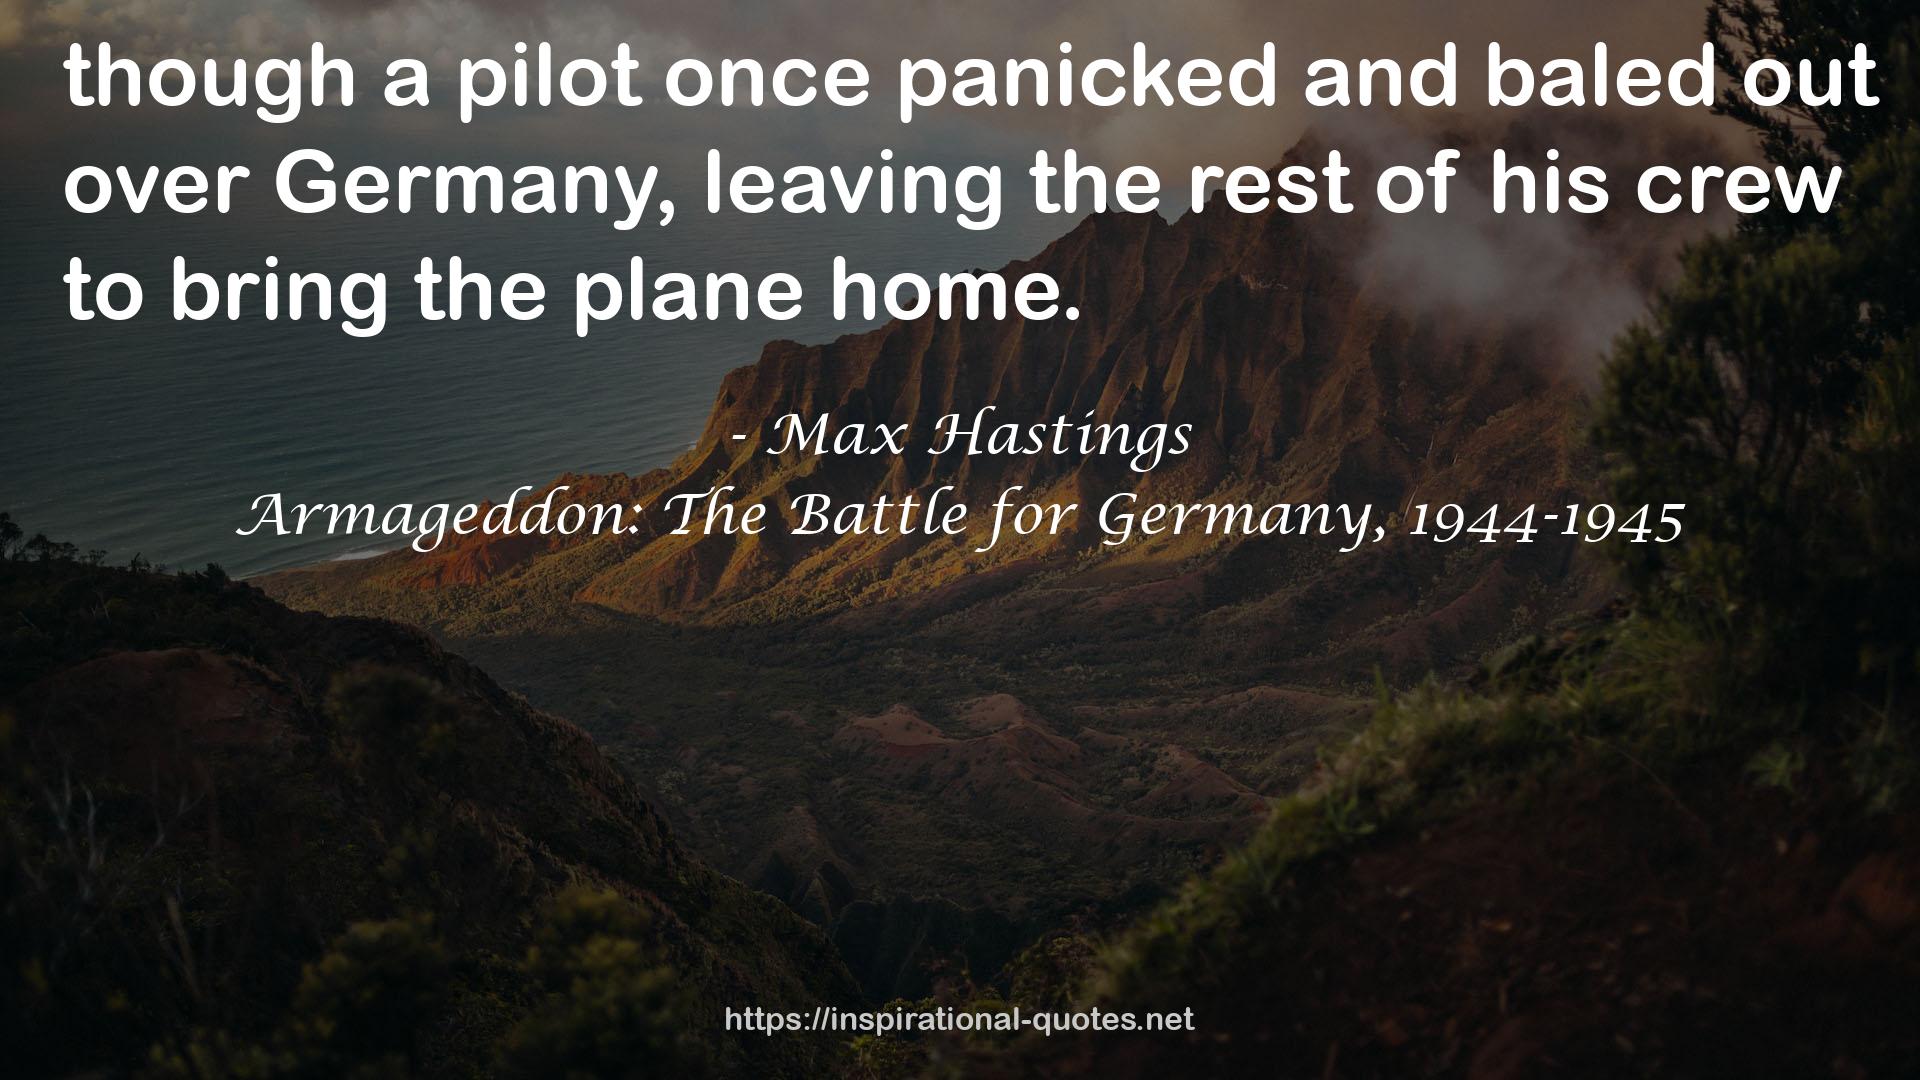 Armageddon: The Battle for Germany, 1944-1945 QUOTES